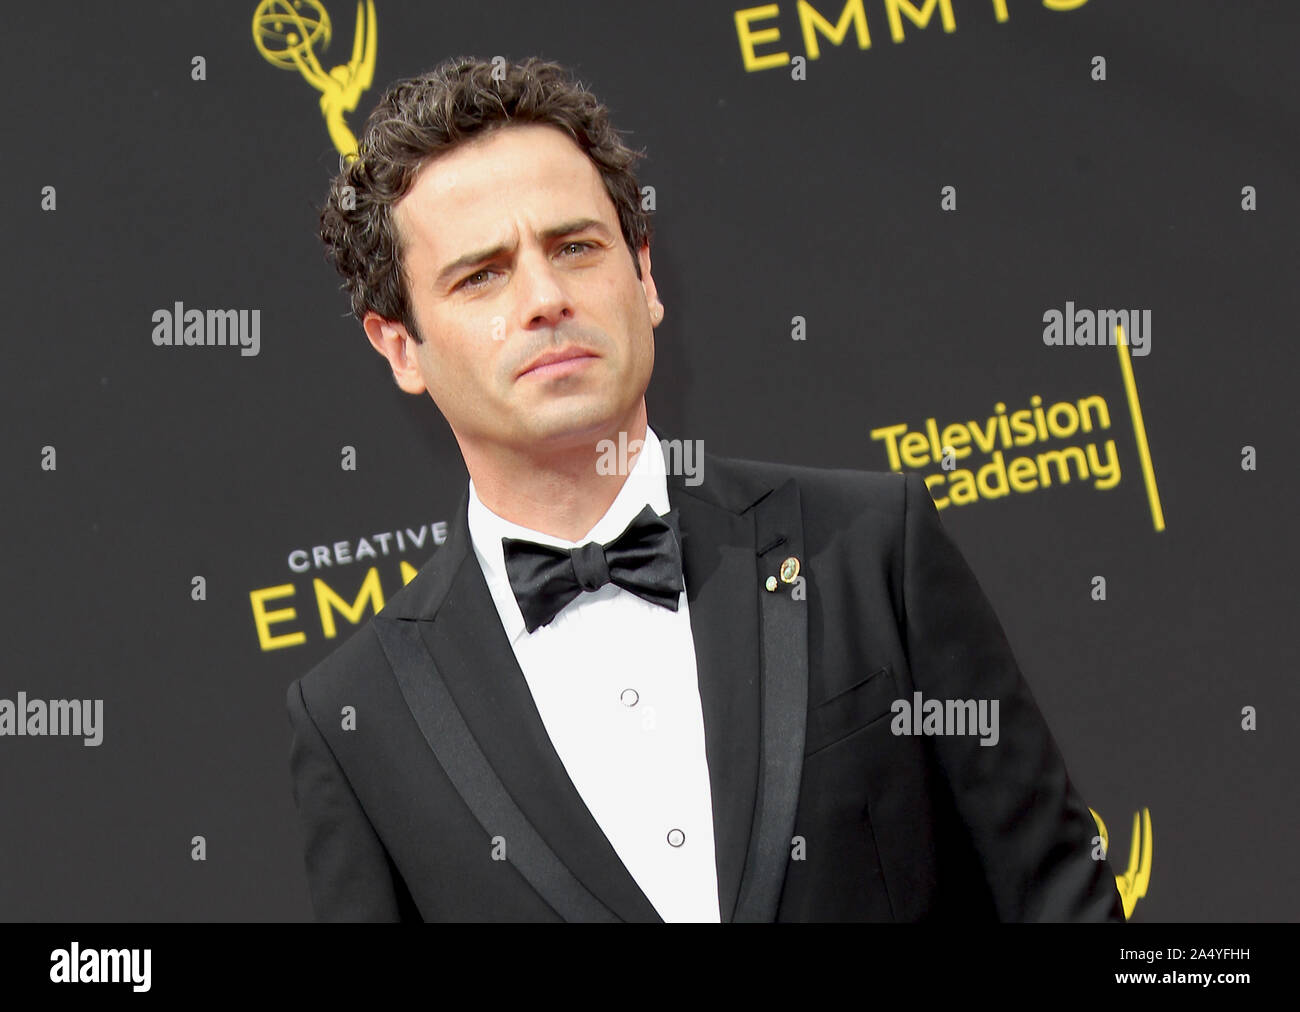 Creative Arts Emmy 2019 - Day 2 Arrivals held at the Microsoft Theatre in Los Angeles, California. Featuring: Luke Kirby Where: Los Angeles, California, United States When: 16 Sep 2019 Credit: Adriana M. Barraza/WENN.com Stock Photo